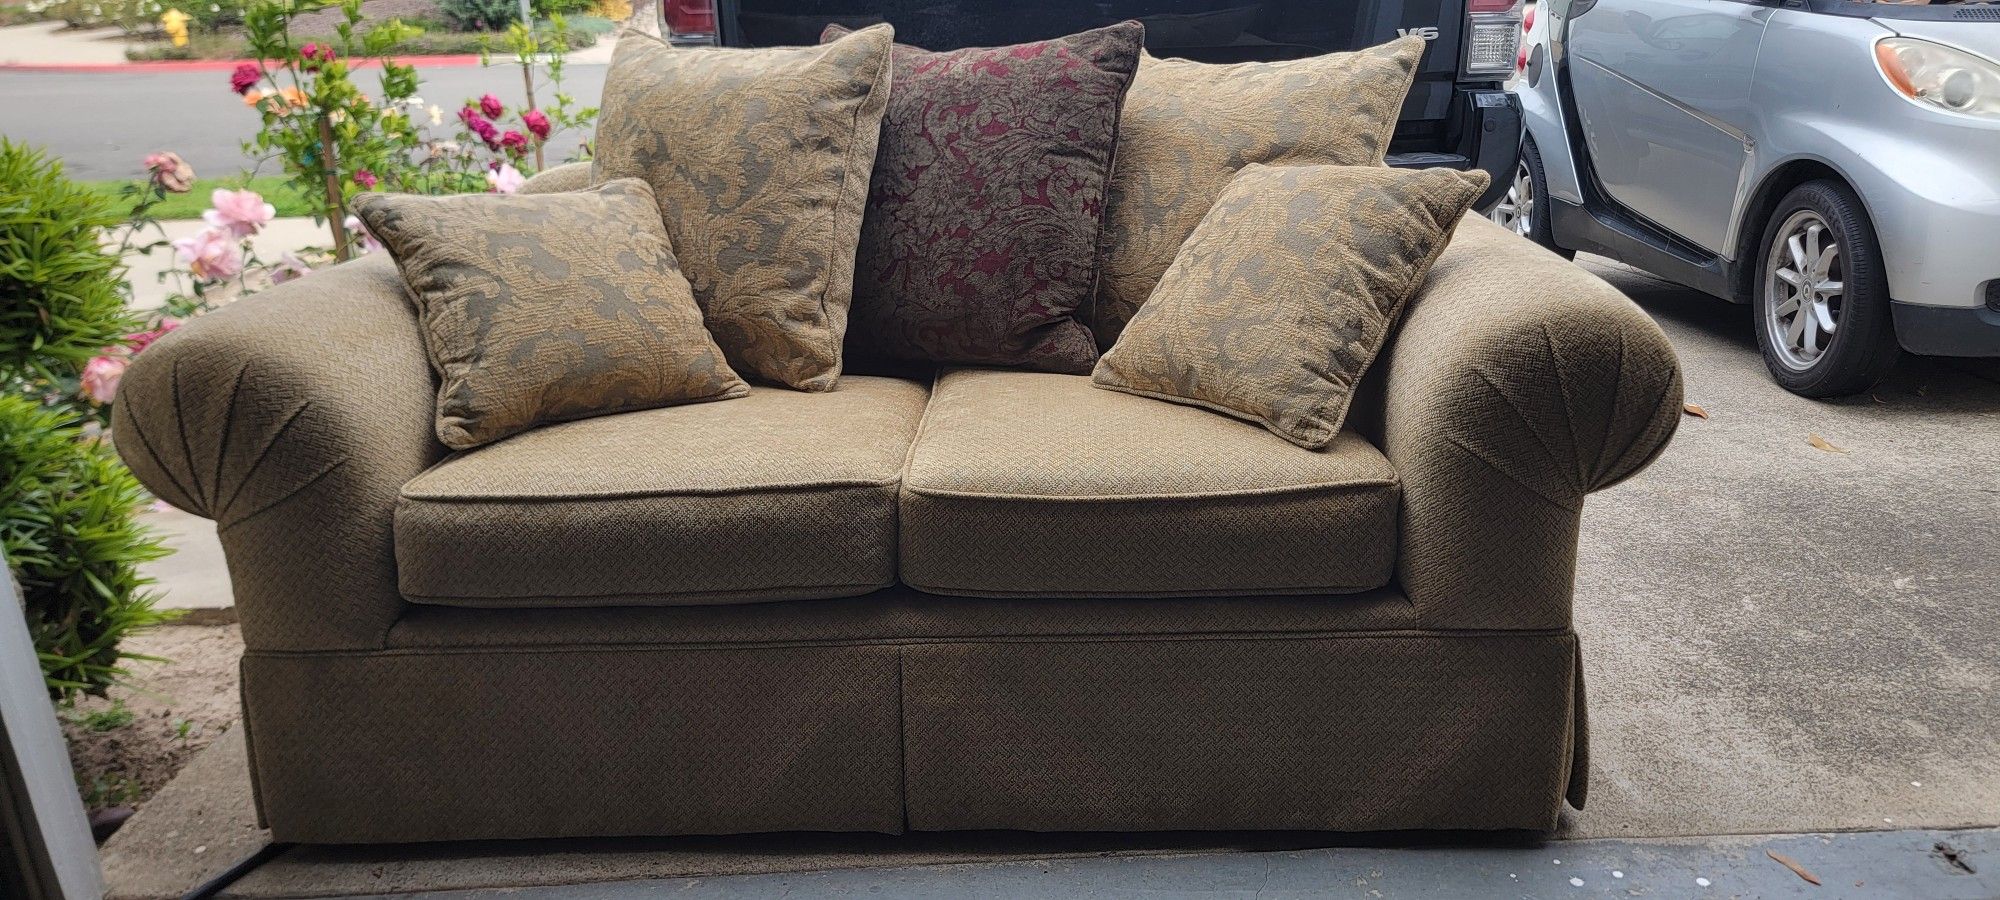 Amazing Love Seat Couch (GREAT CONDITION) OBO